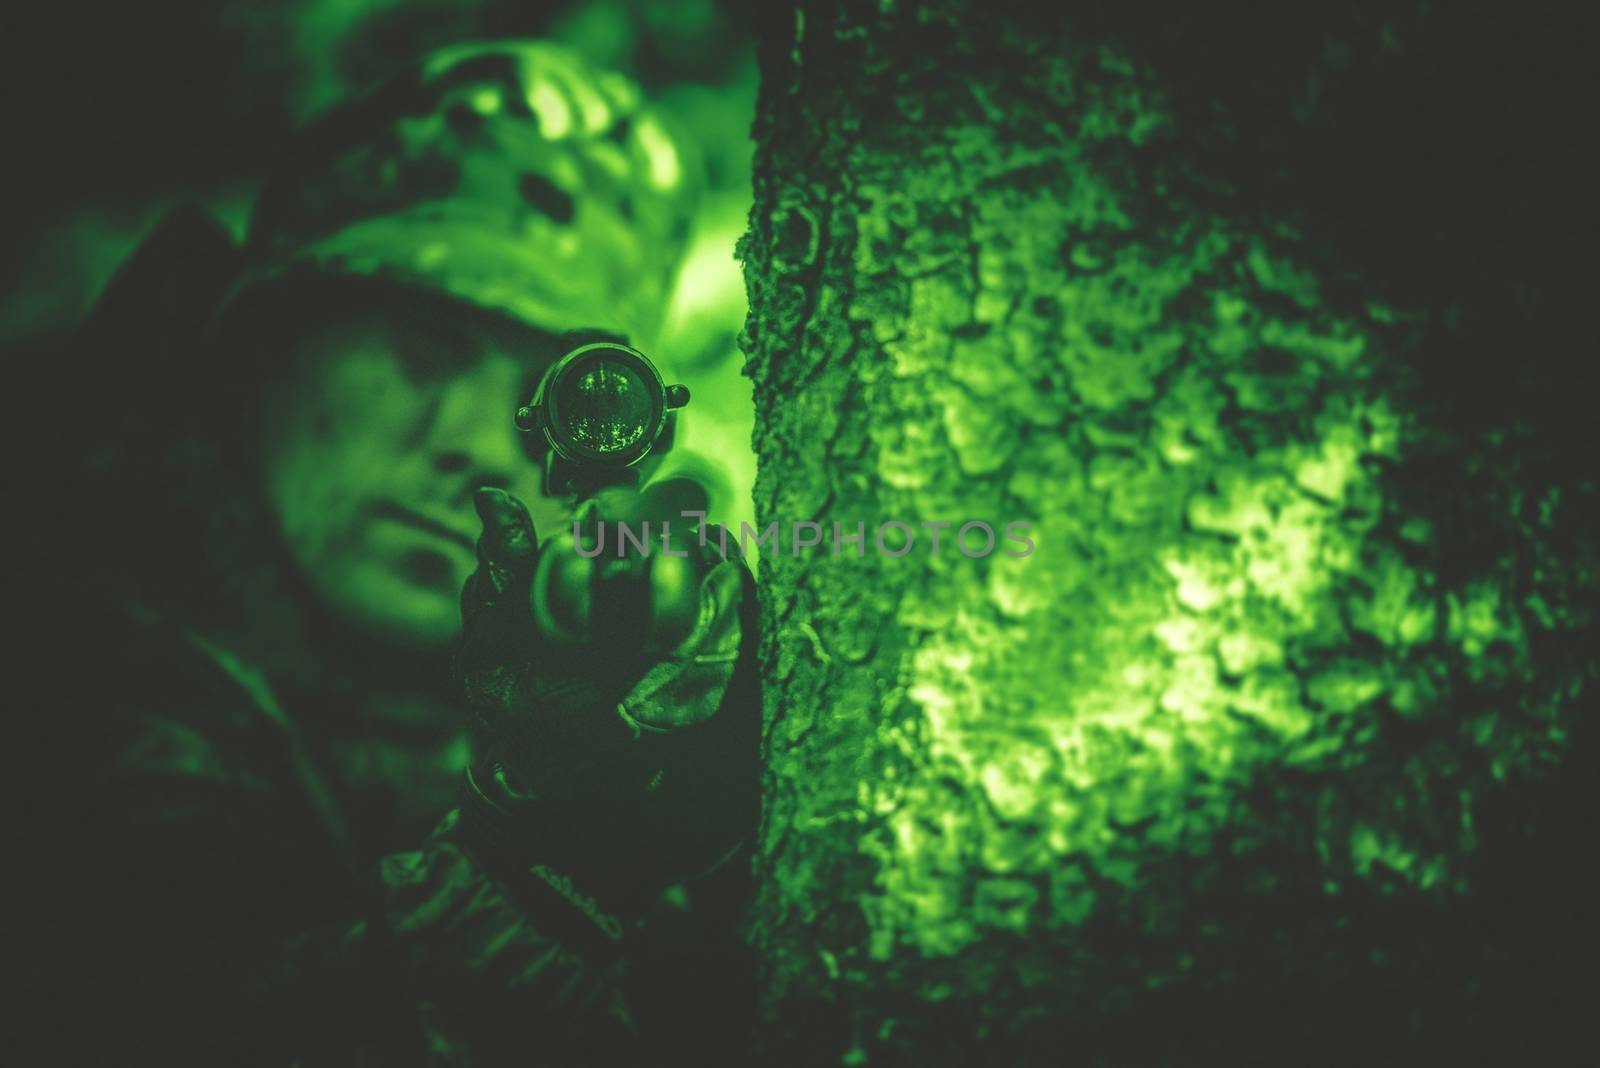 Hunting Poacher with Riffle in Night Vision Color Grading.